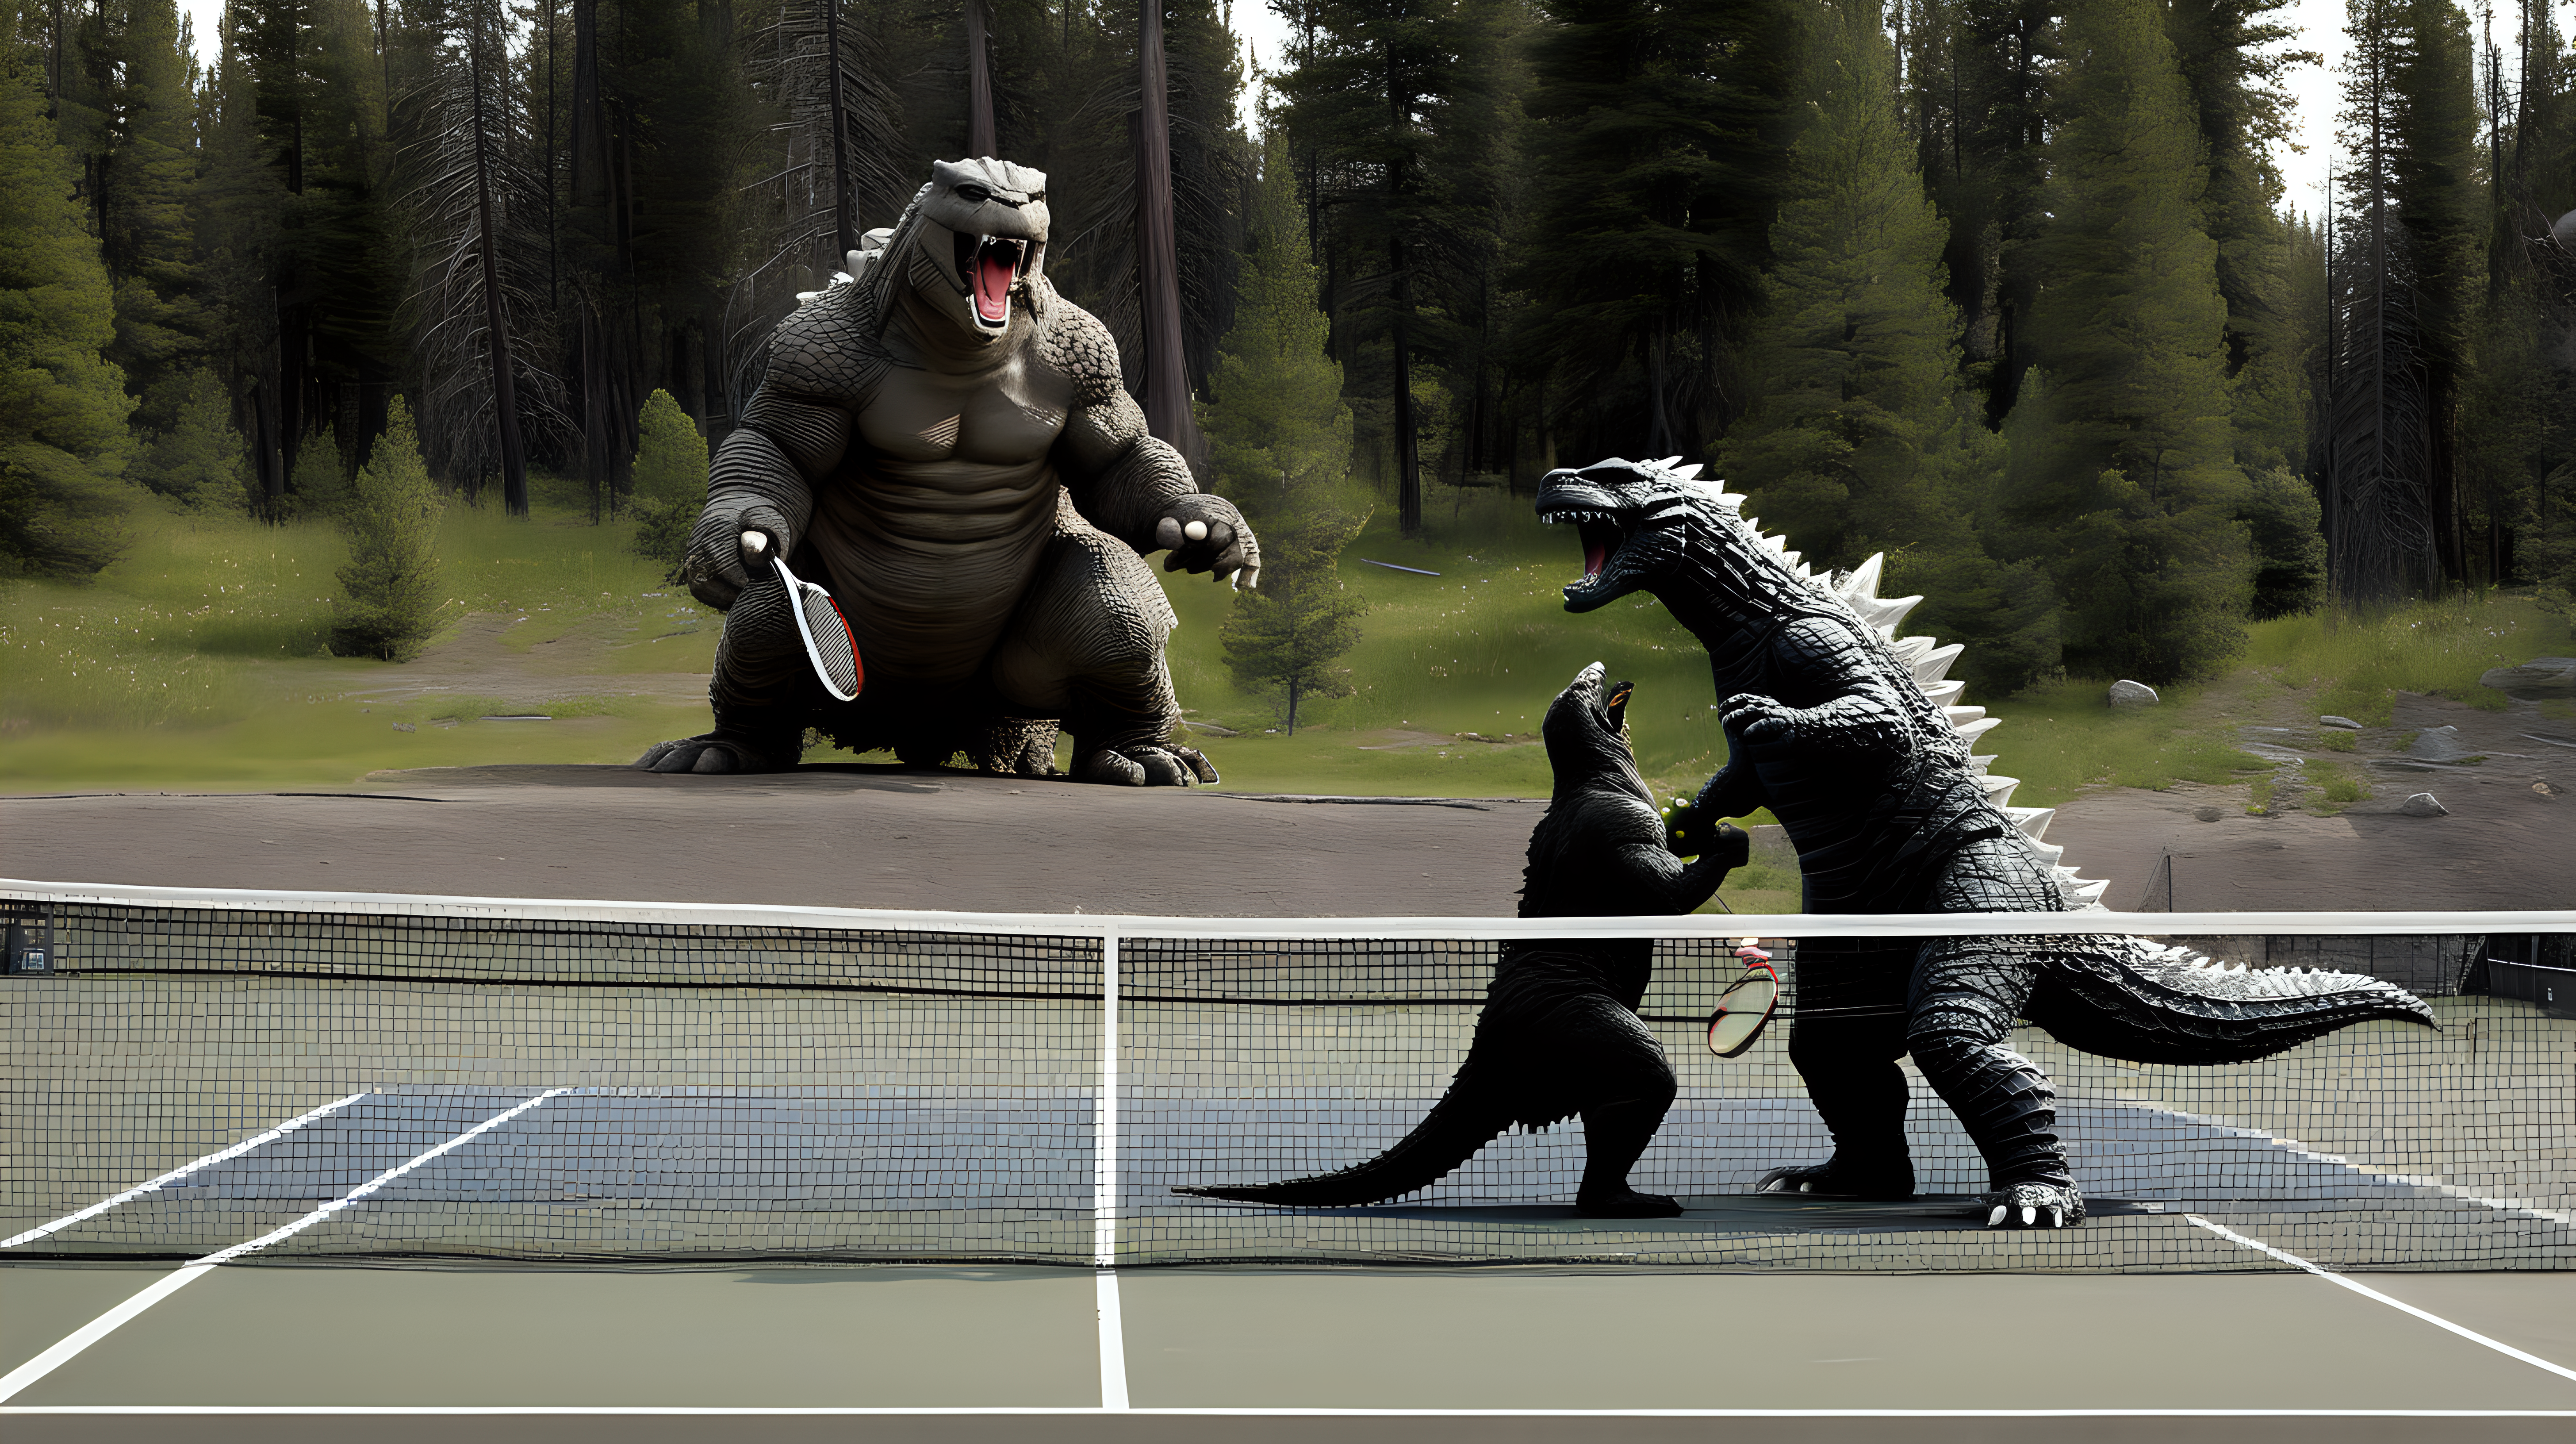 Thor and Godzilla playing tennis in Yellowstone National